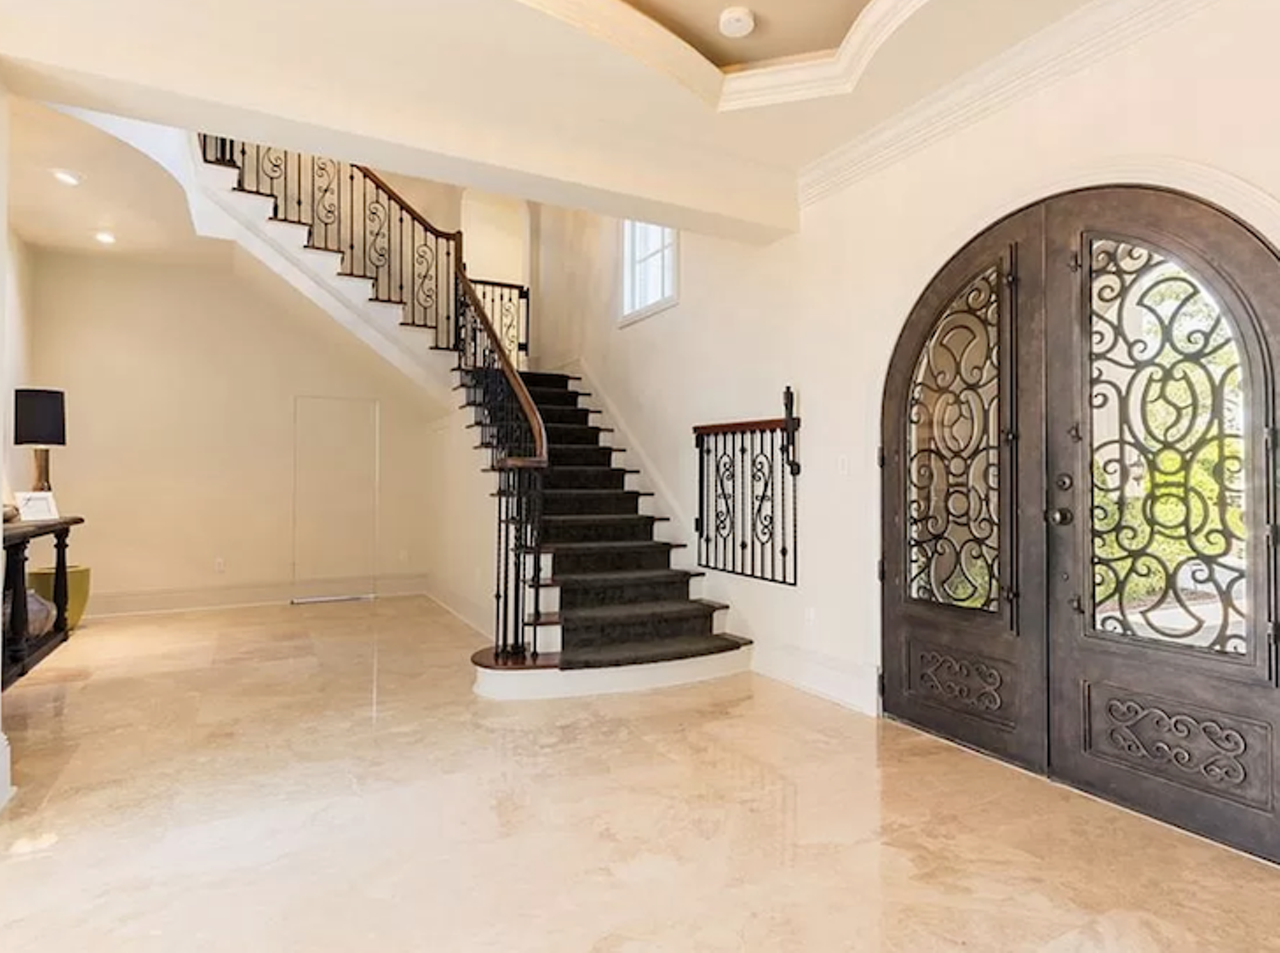 MLB All-Star Jimmy Rollins is selling his Tampa mansion for $6.8